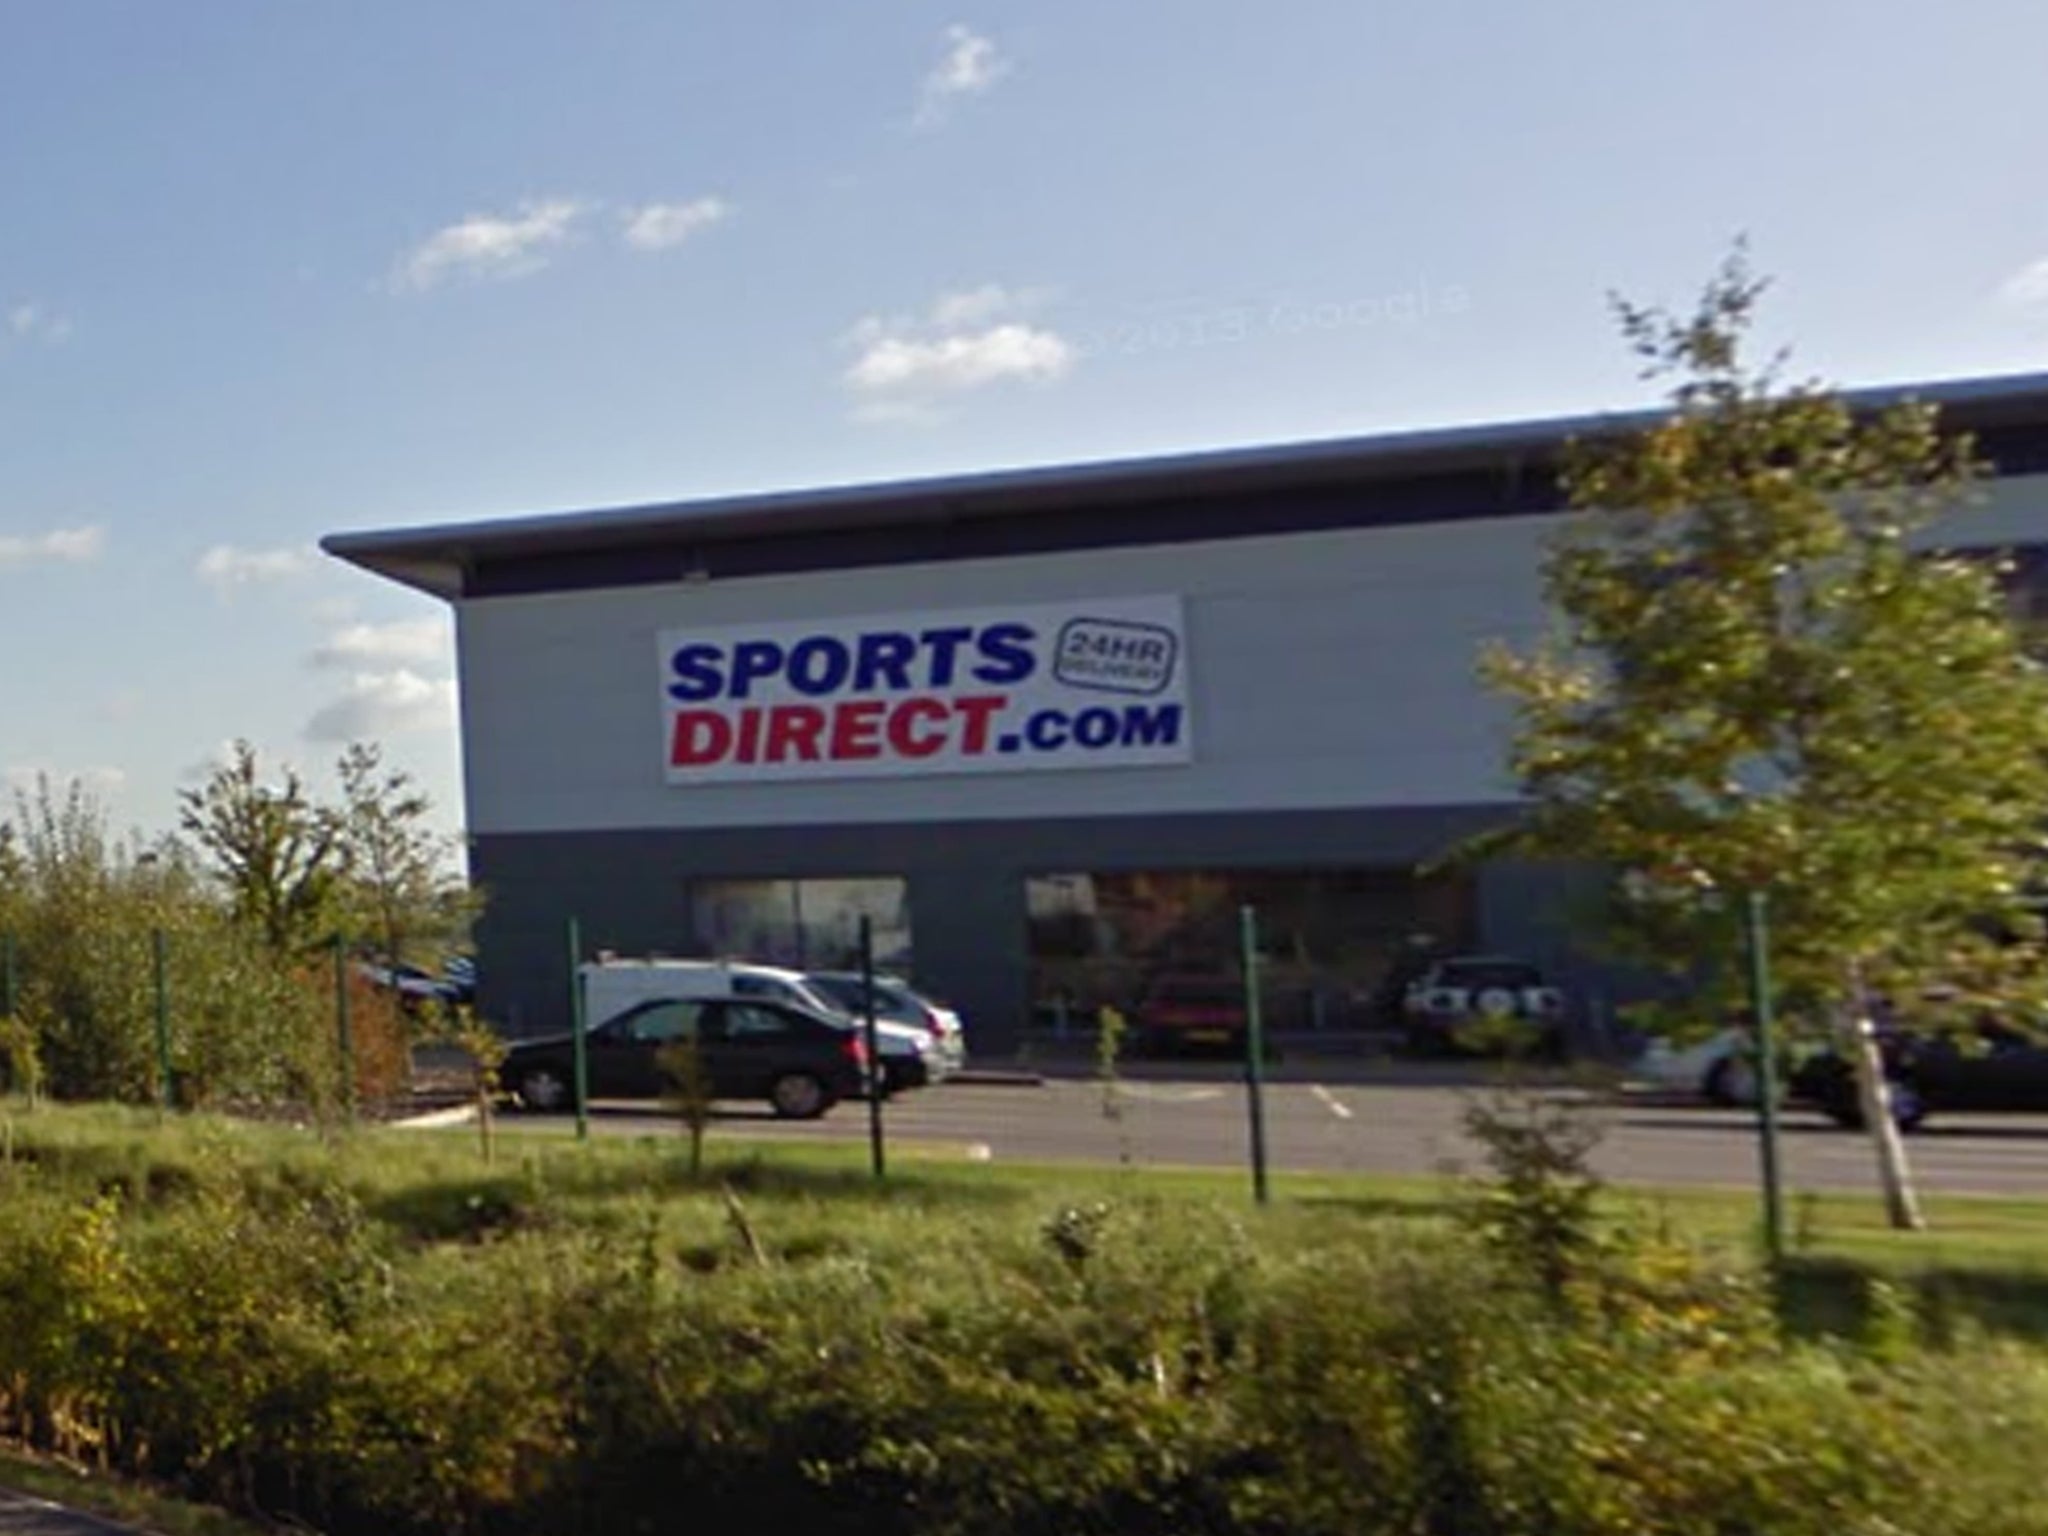 The baby was reportedly born in a Sports Direct warehouse in Shirebrook, Derbyshire on New Year's Day